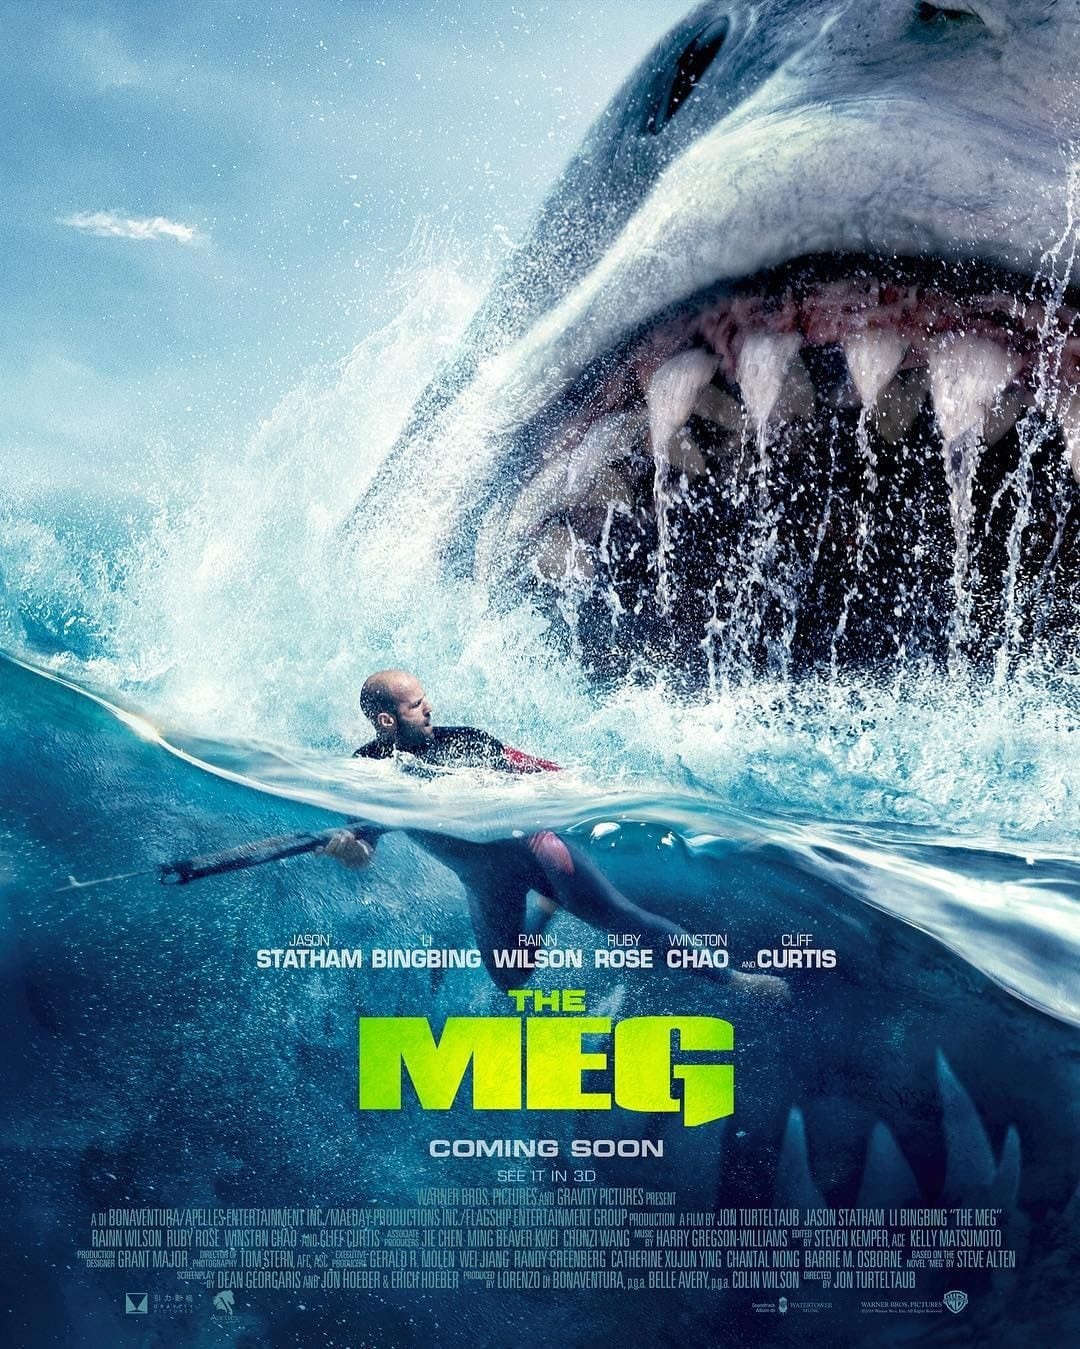 Movie Review: “The Meg” does not disappoint despite its flaws – The ...